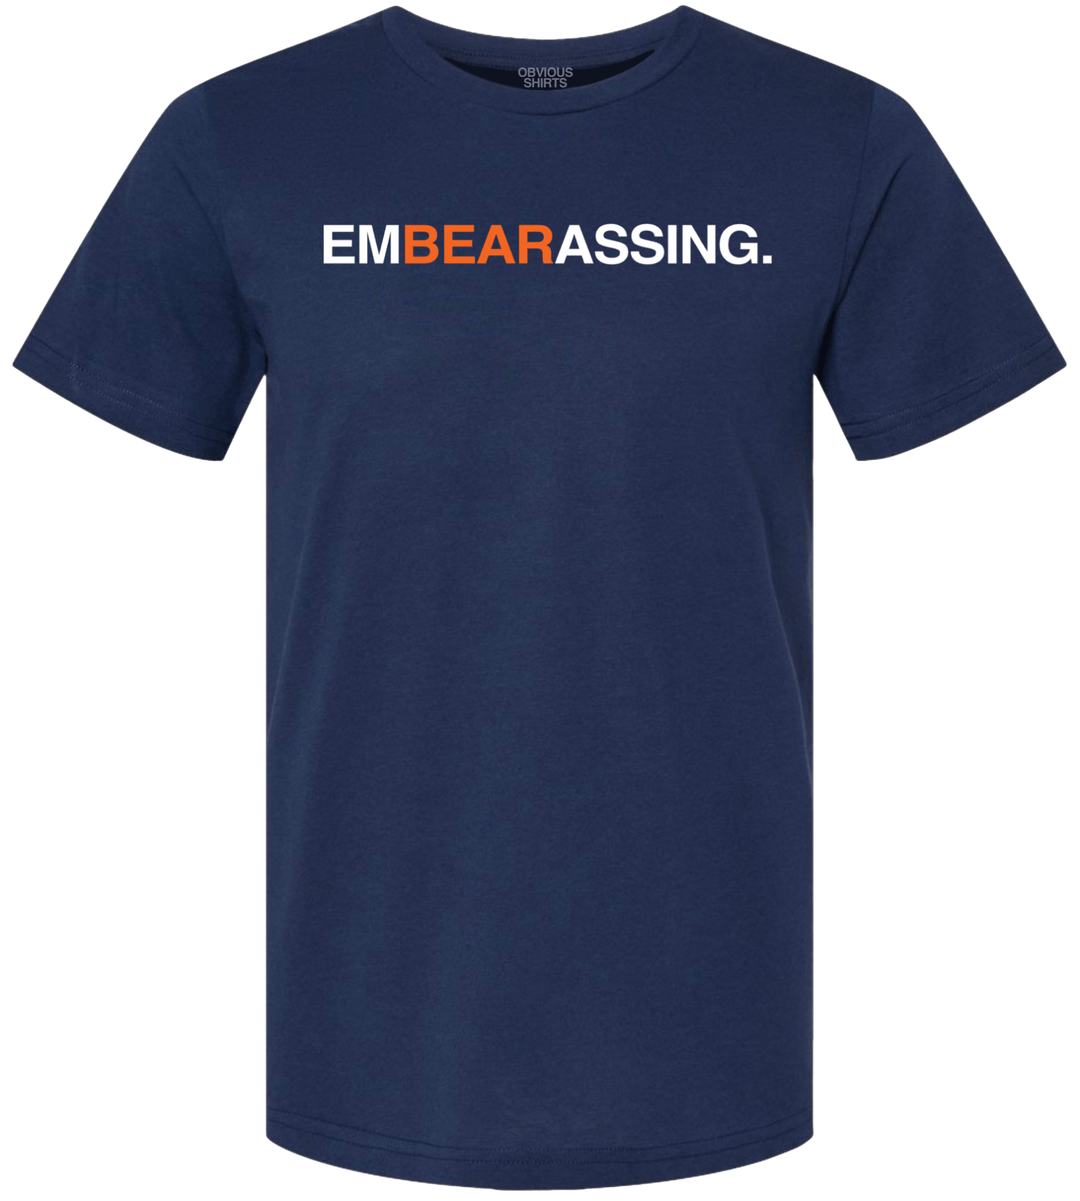 EMBEARASSING. - OBVIOUS SHIRTS